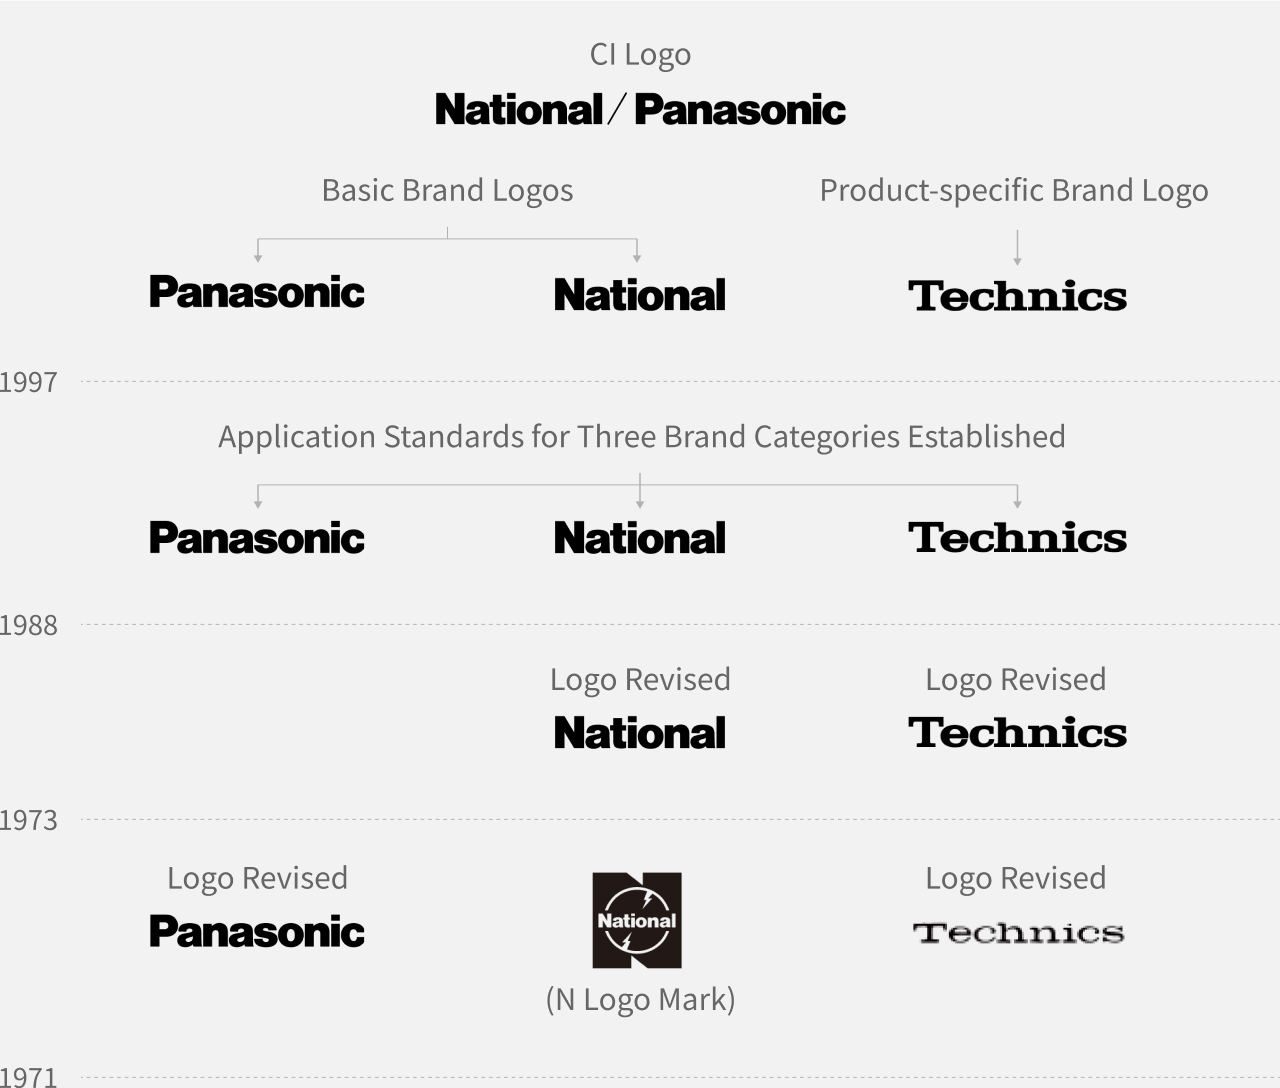 1997: "National/Panasonic" as our CI logo, "Panasonic" and "National" as our basic brand logos, and "Technics" as our product-specific brand logo. 1988: Application standards for three brand categolies estabilished as "Panasonic," "National," and "Technics." 1973: "National" and "Technics" logos revised. 1971: "Panasonic" logo revised, N-logo Mark "National," and "Technics" logo revised.